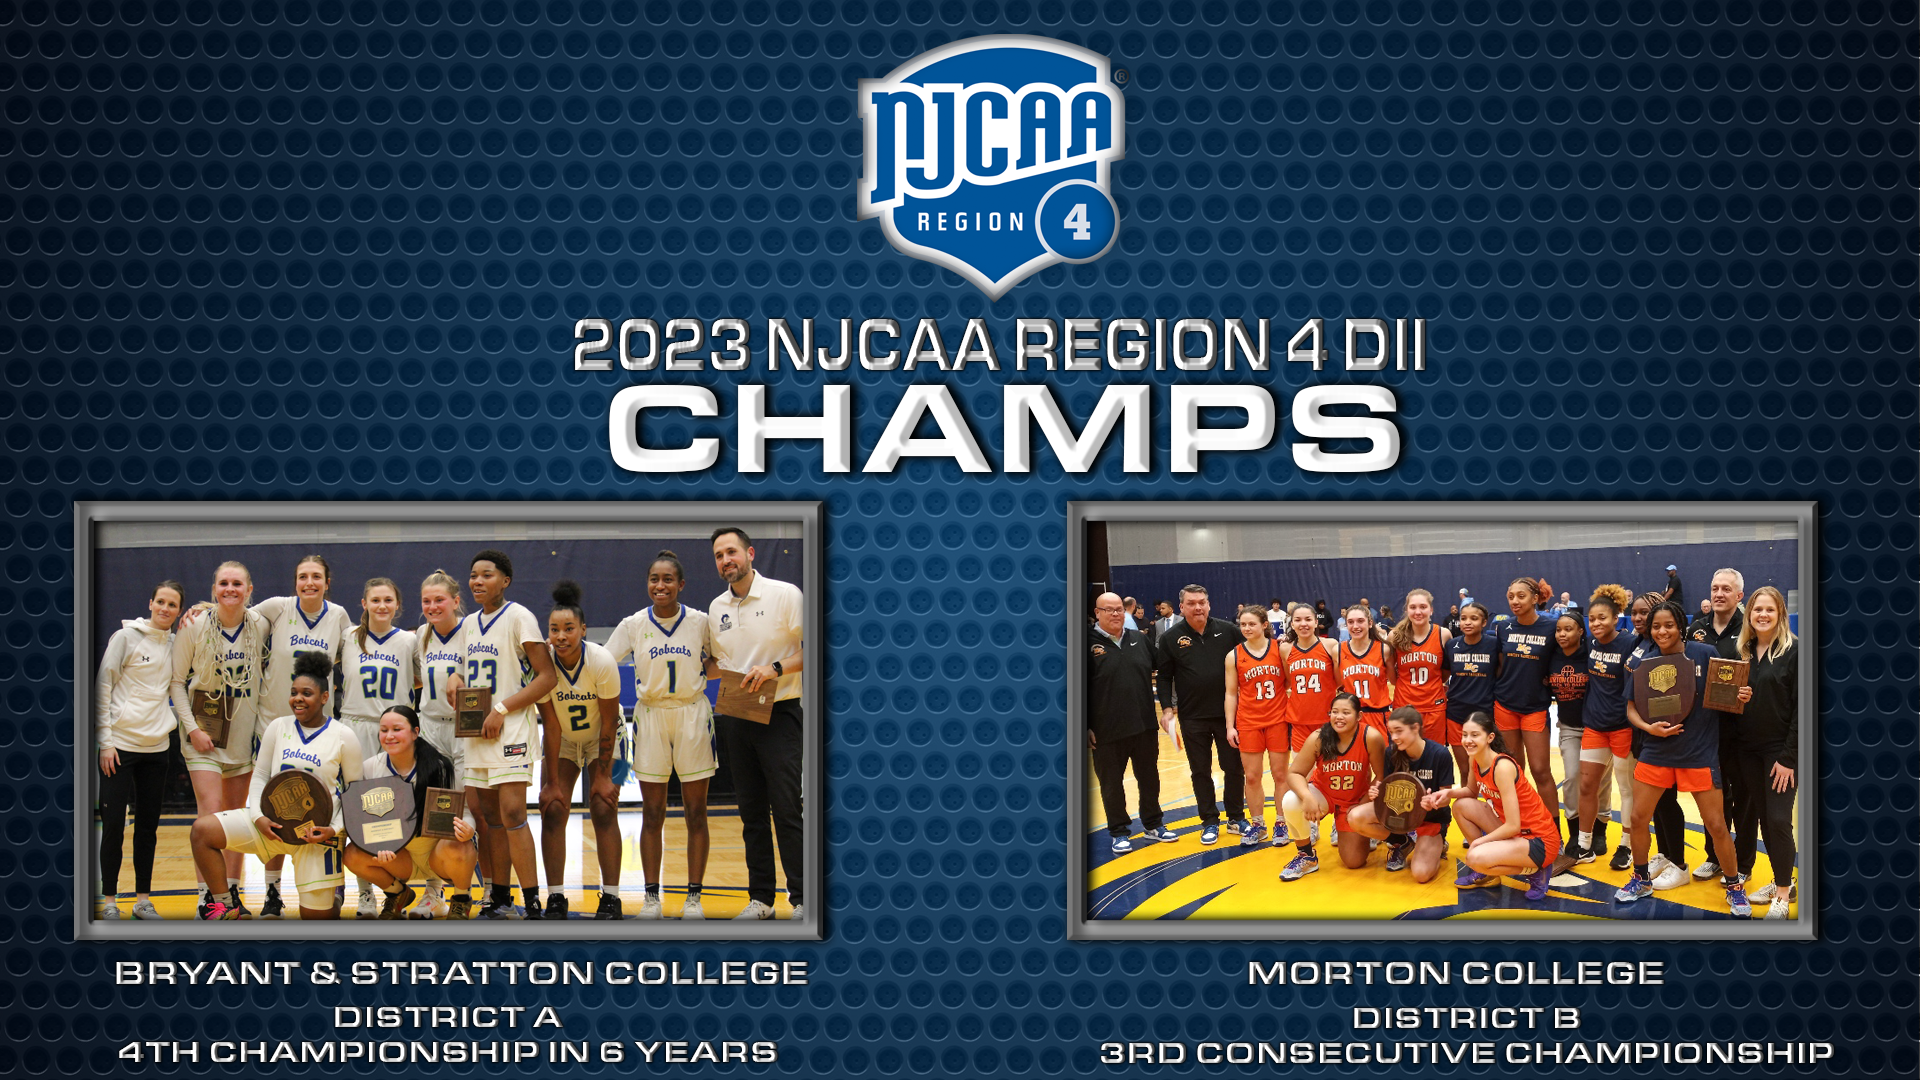 (Images courtesy of Bryant & Stratton College Athletics & Morton College Athletics)